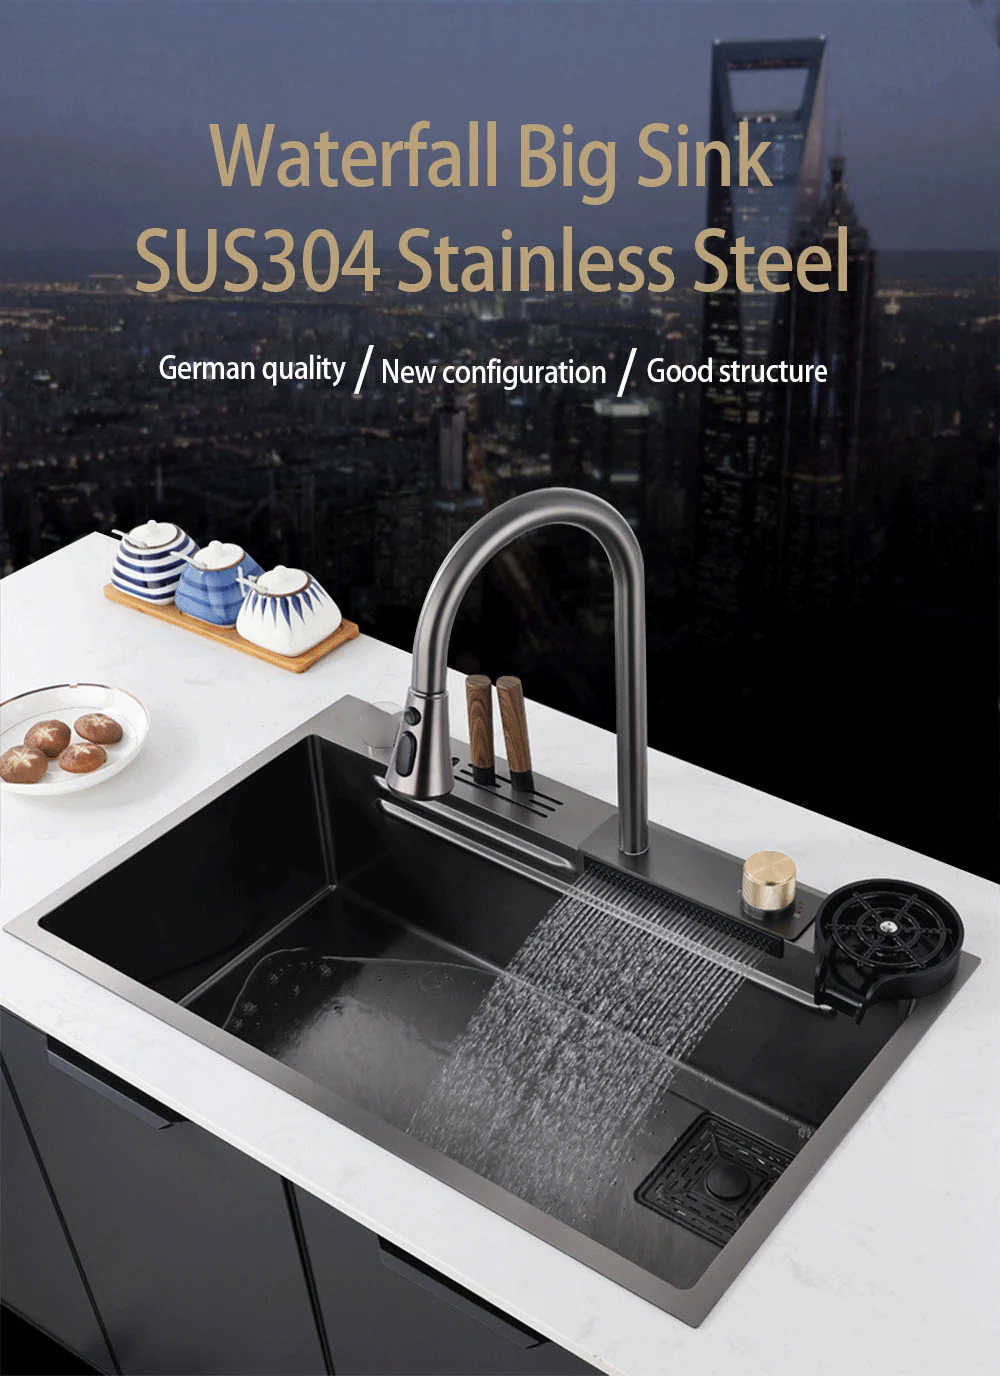 InArt Nano 304 Stainless Steel Single Bowl Handmade Black Color Waterfall Kitchen Sink 30x18 Inches With Faucet Knife Holder Drain Basket - InArt-Studio